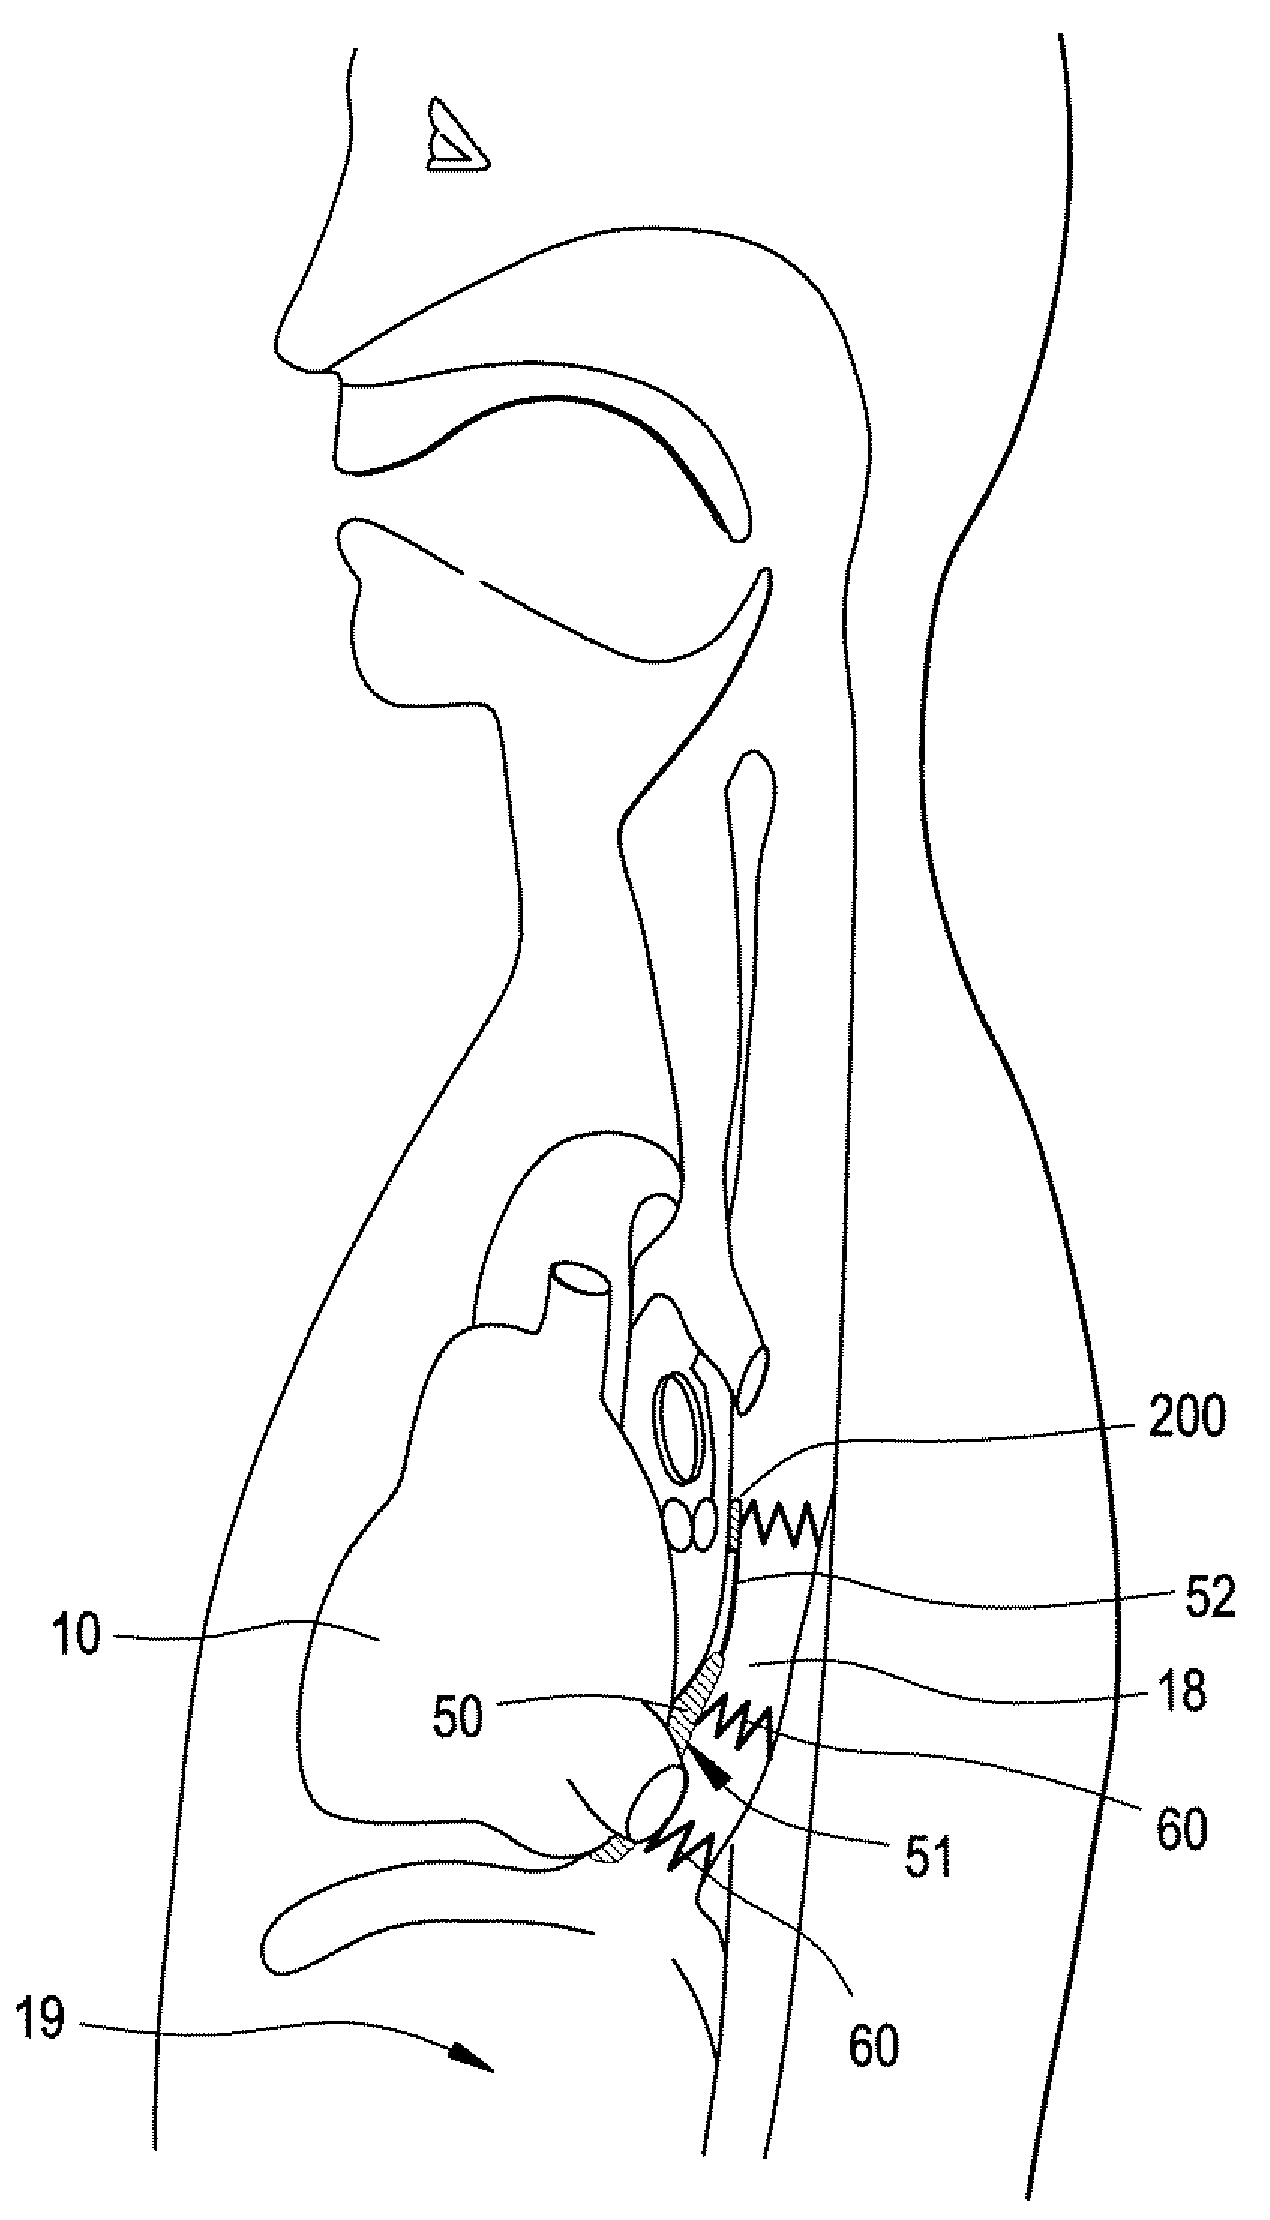 Implantable Devices and Methods for Stimulation of Cardiac or Other Tissues